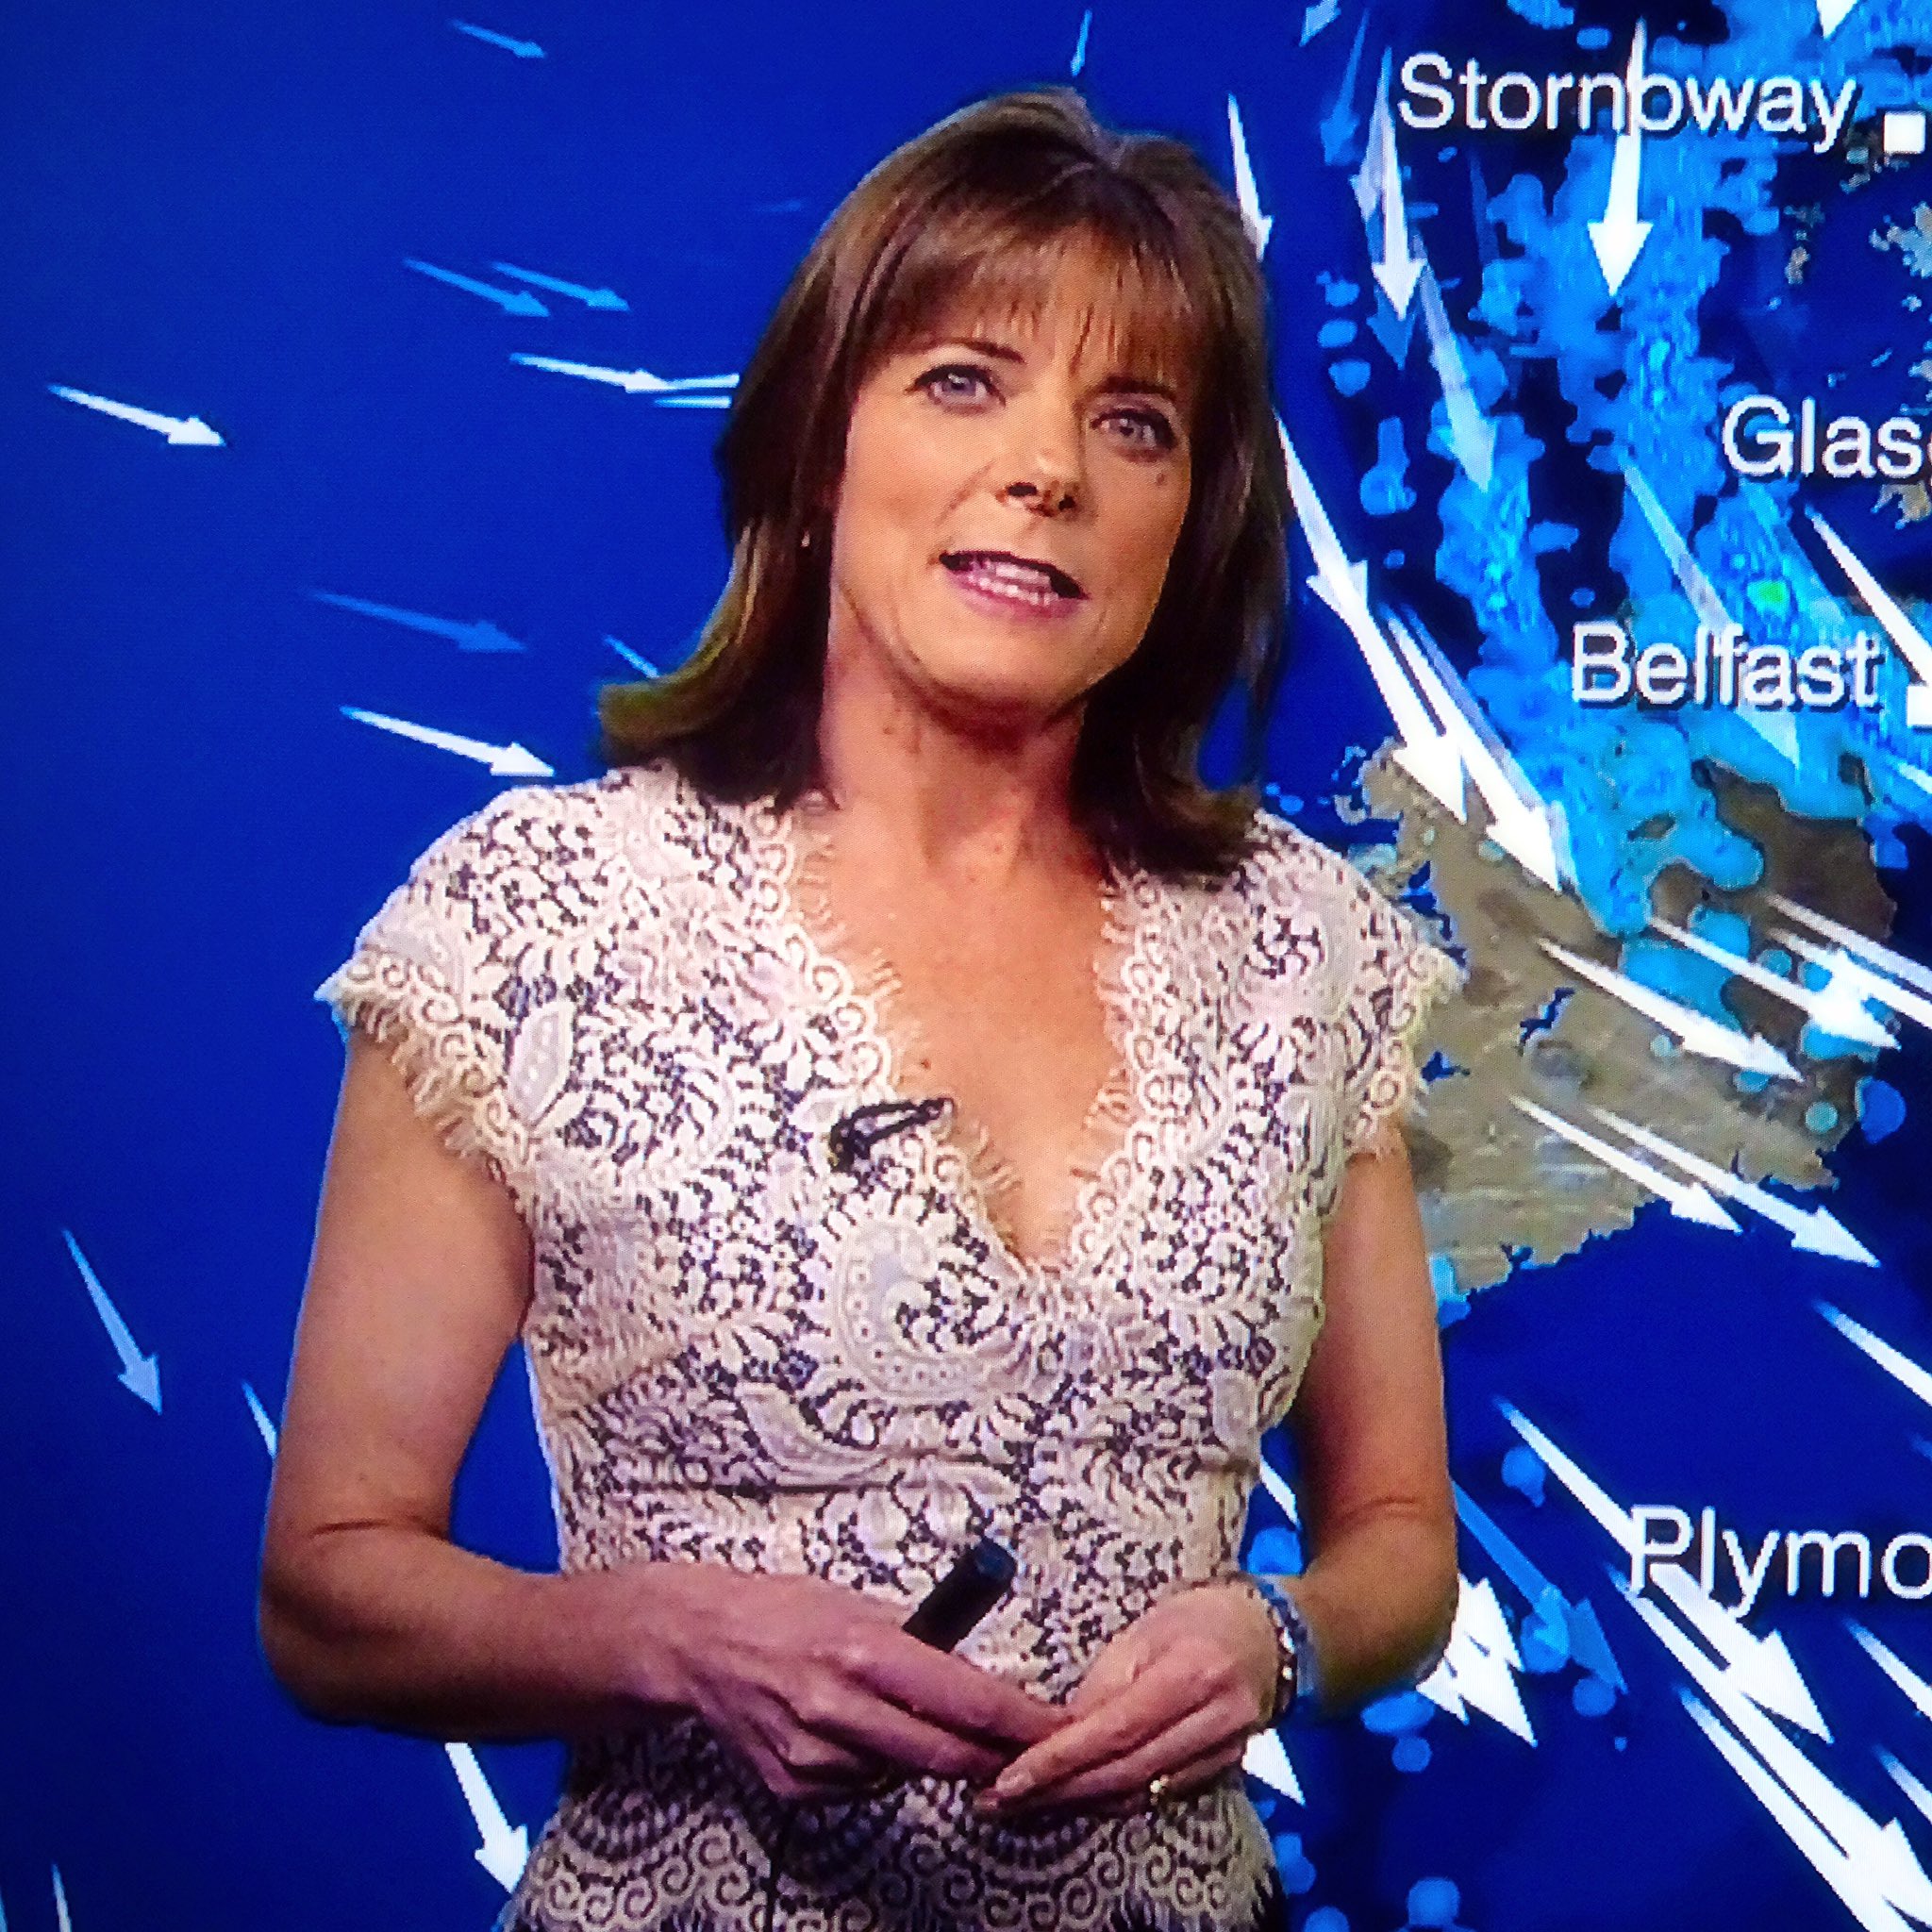 Ray Mach on Twitter: "Louise Lear presenting BBC weather ...